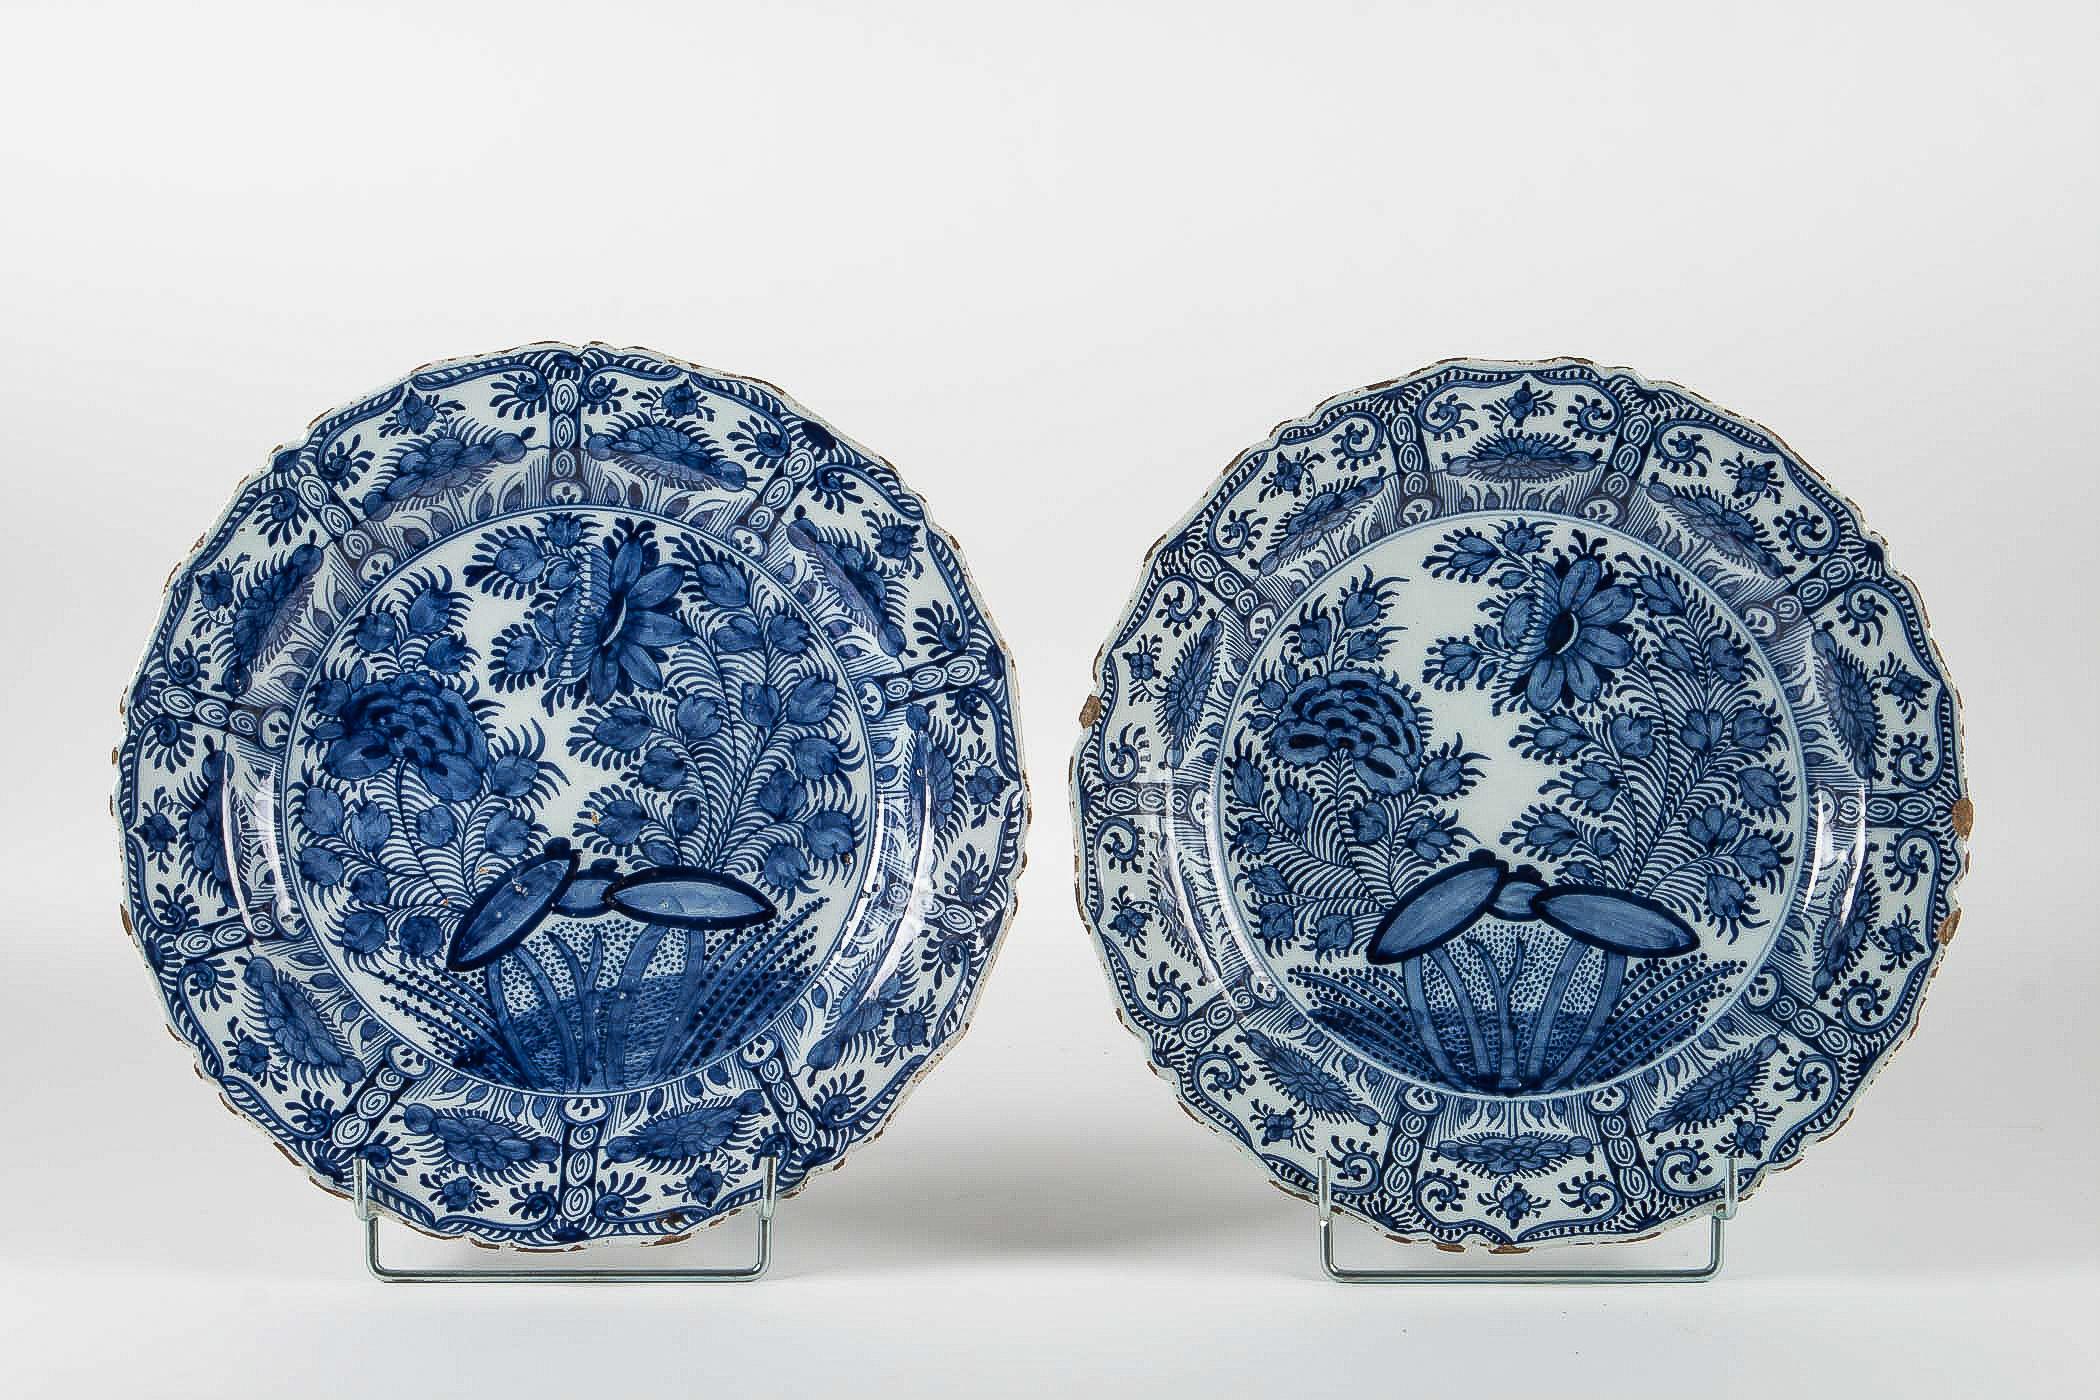 Sign by Ax Porcelain Factory, mid-18th century, magnificent pair of Faience Delft round dishes.

Magnificent and rare Delft pair of faience dishes, hand painted in a blue cameo, depicting foliages and flowers. These Blue and White Delft dishes